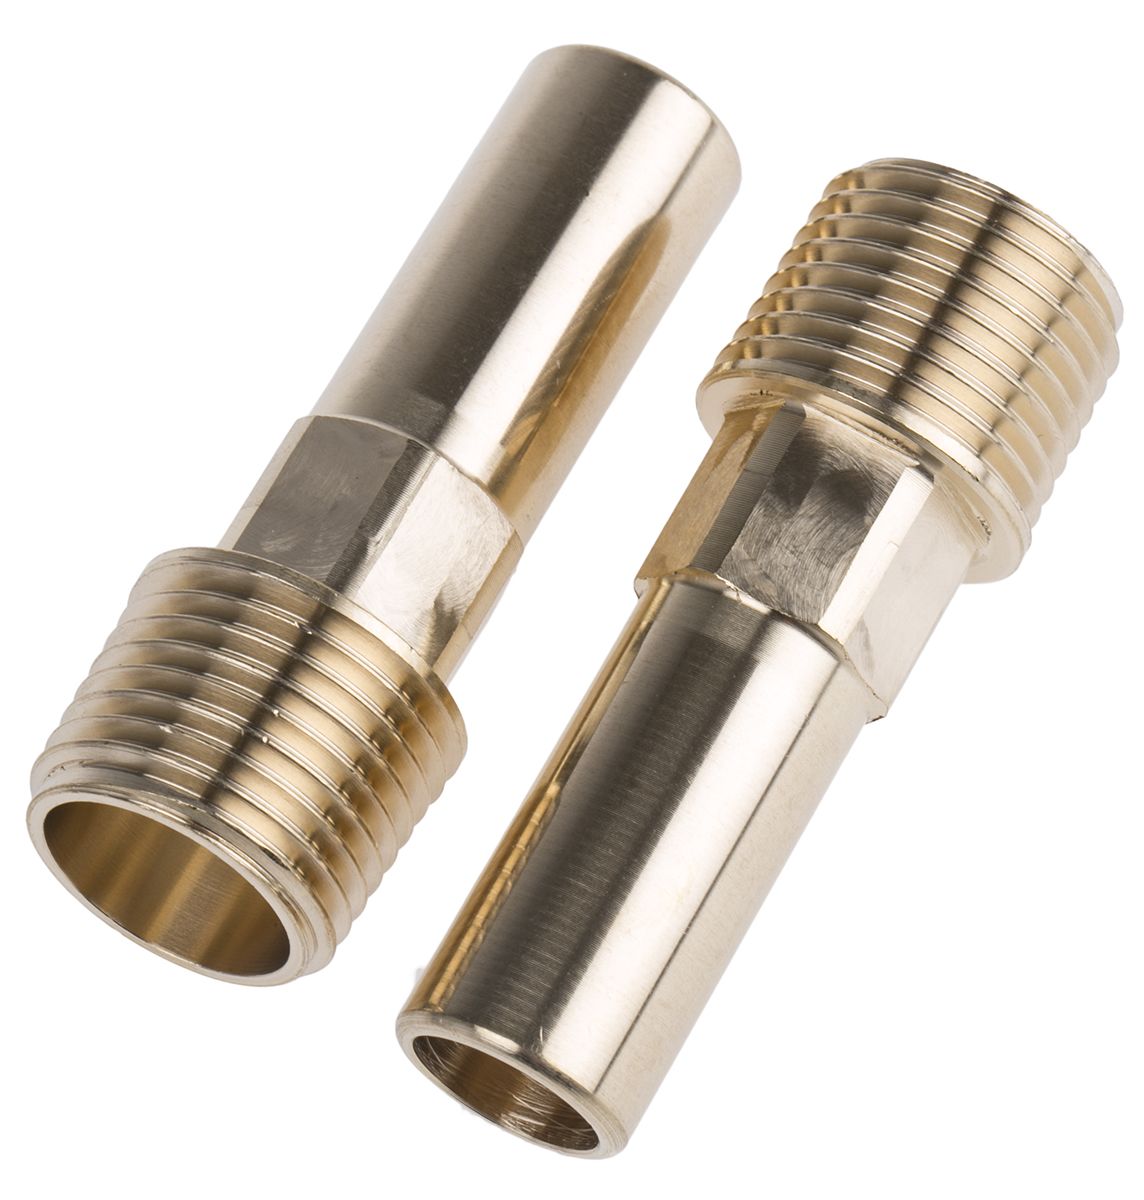 JG Speedfit Brass Pipe Fitting, Straight Push Fit Stem Adapter, Male R 1/2in 15mm